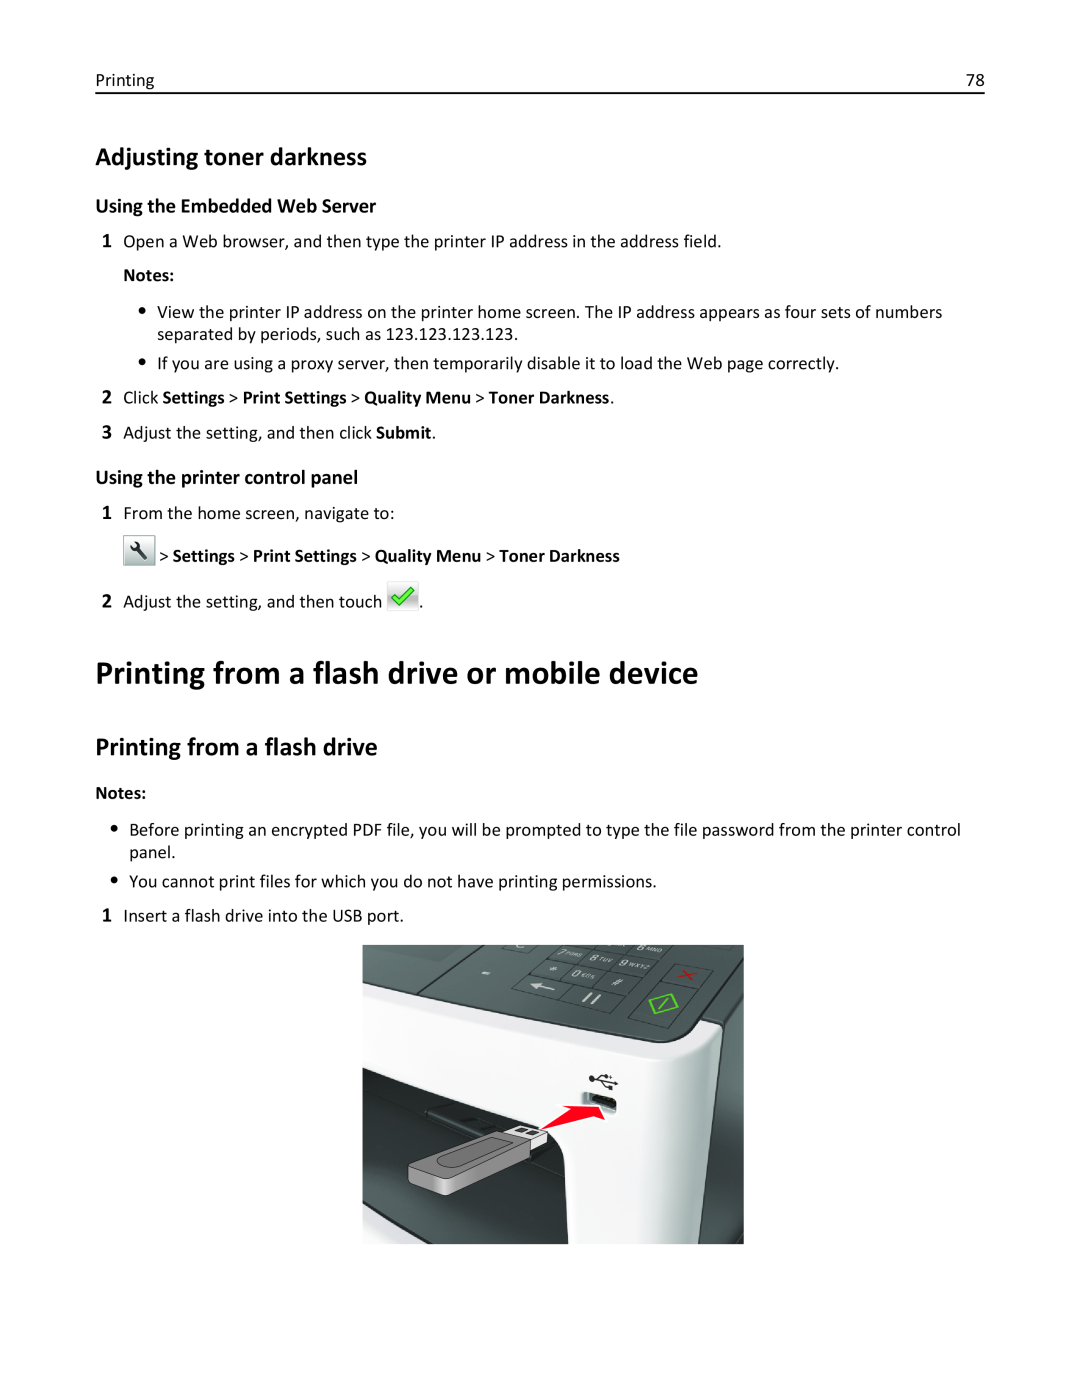 Lexmark 35S5701, 470 Printing from a flash drive or mobile device, Adjusting toner darkness, Using the Embedded Web Server 